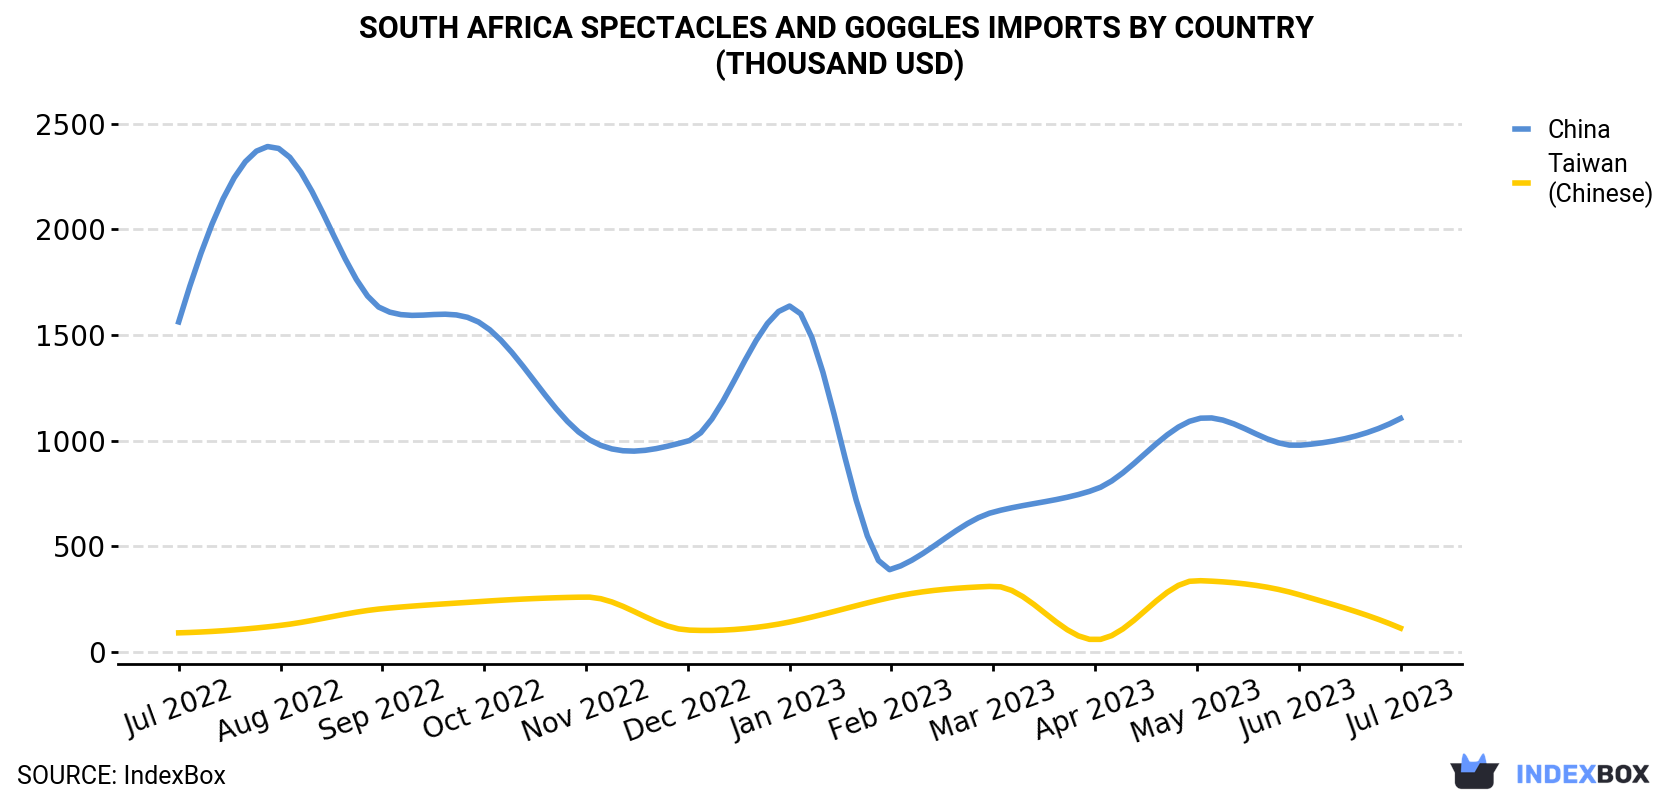 South Africa Spectacles And Goggles Imports By Country (Thousand USD)